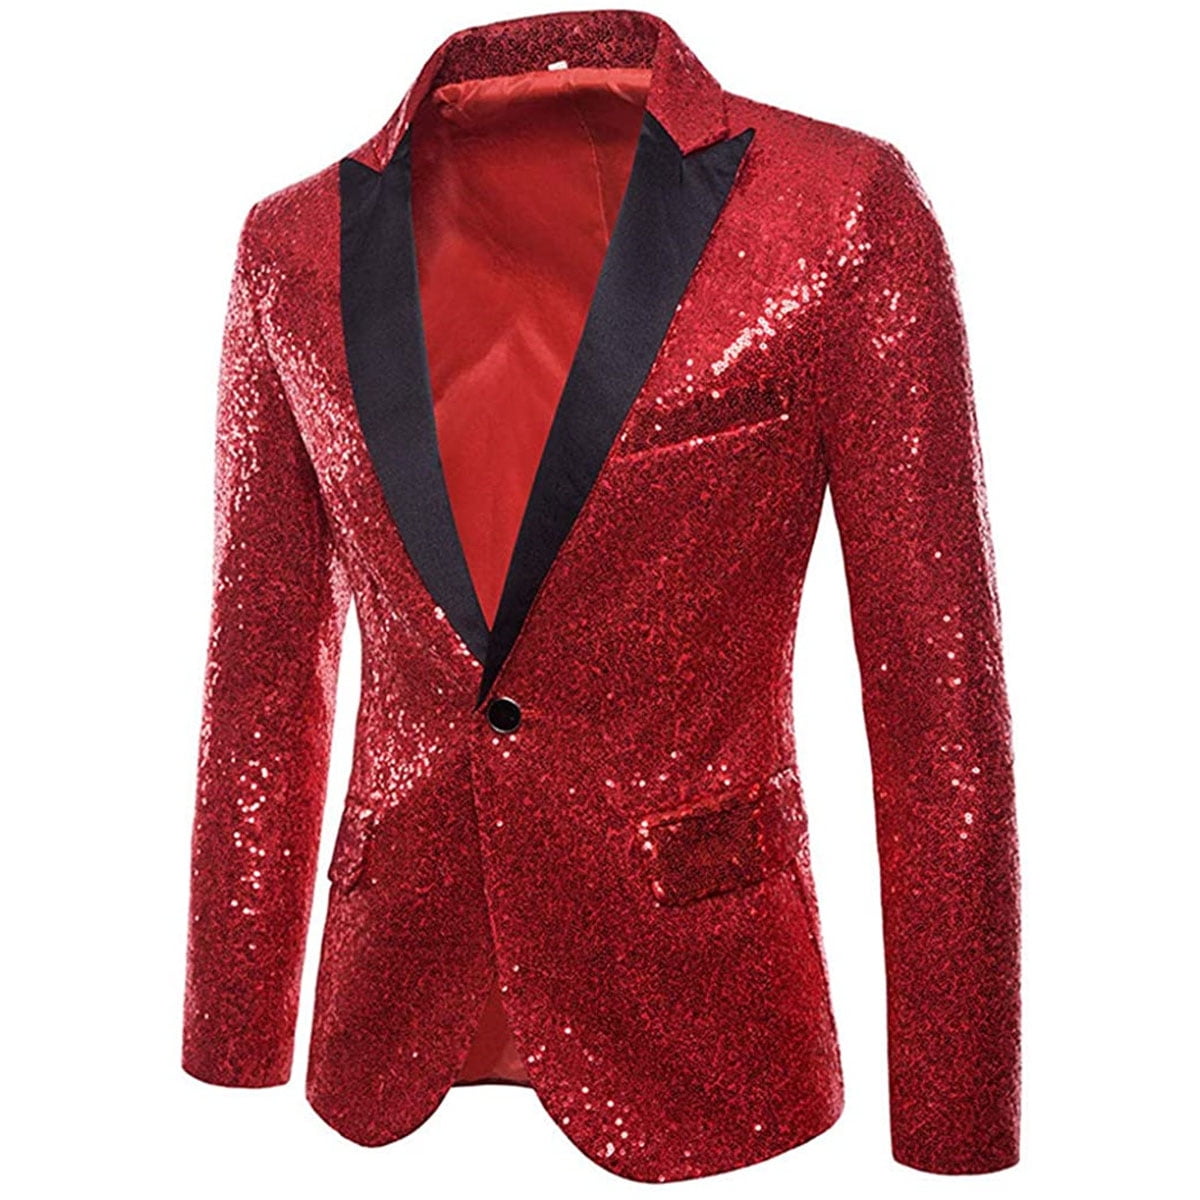 Buy White and Red Tuxedo - Andre Emilio | Free Shipping